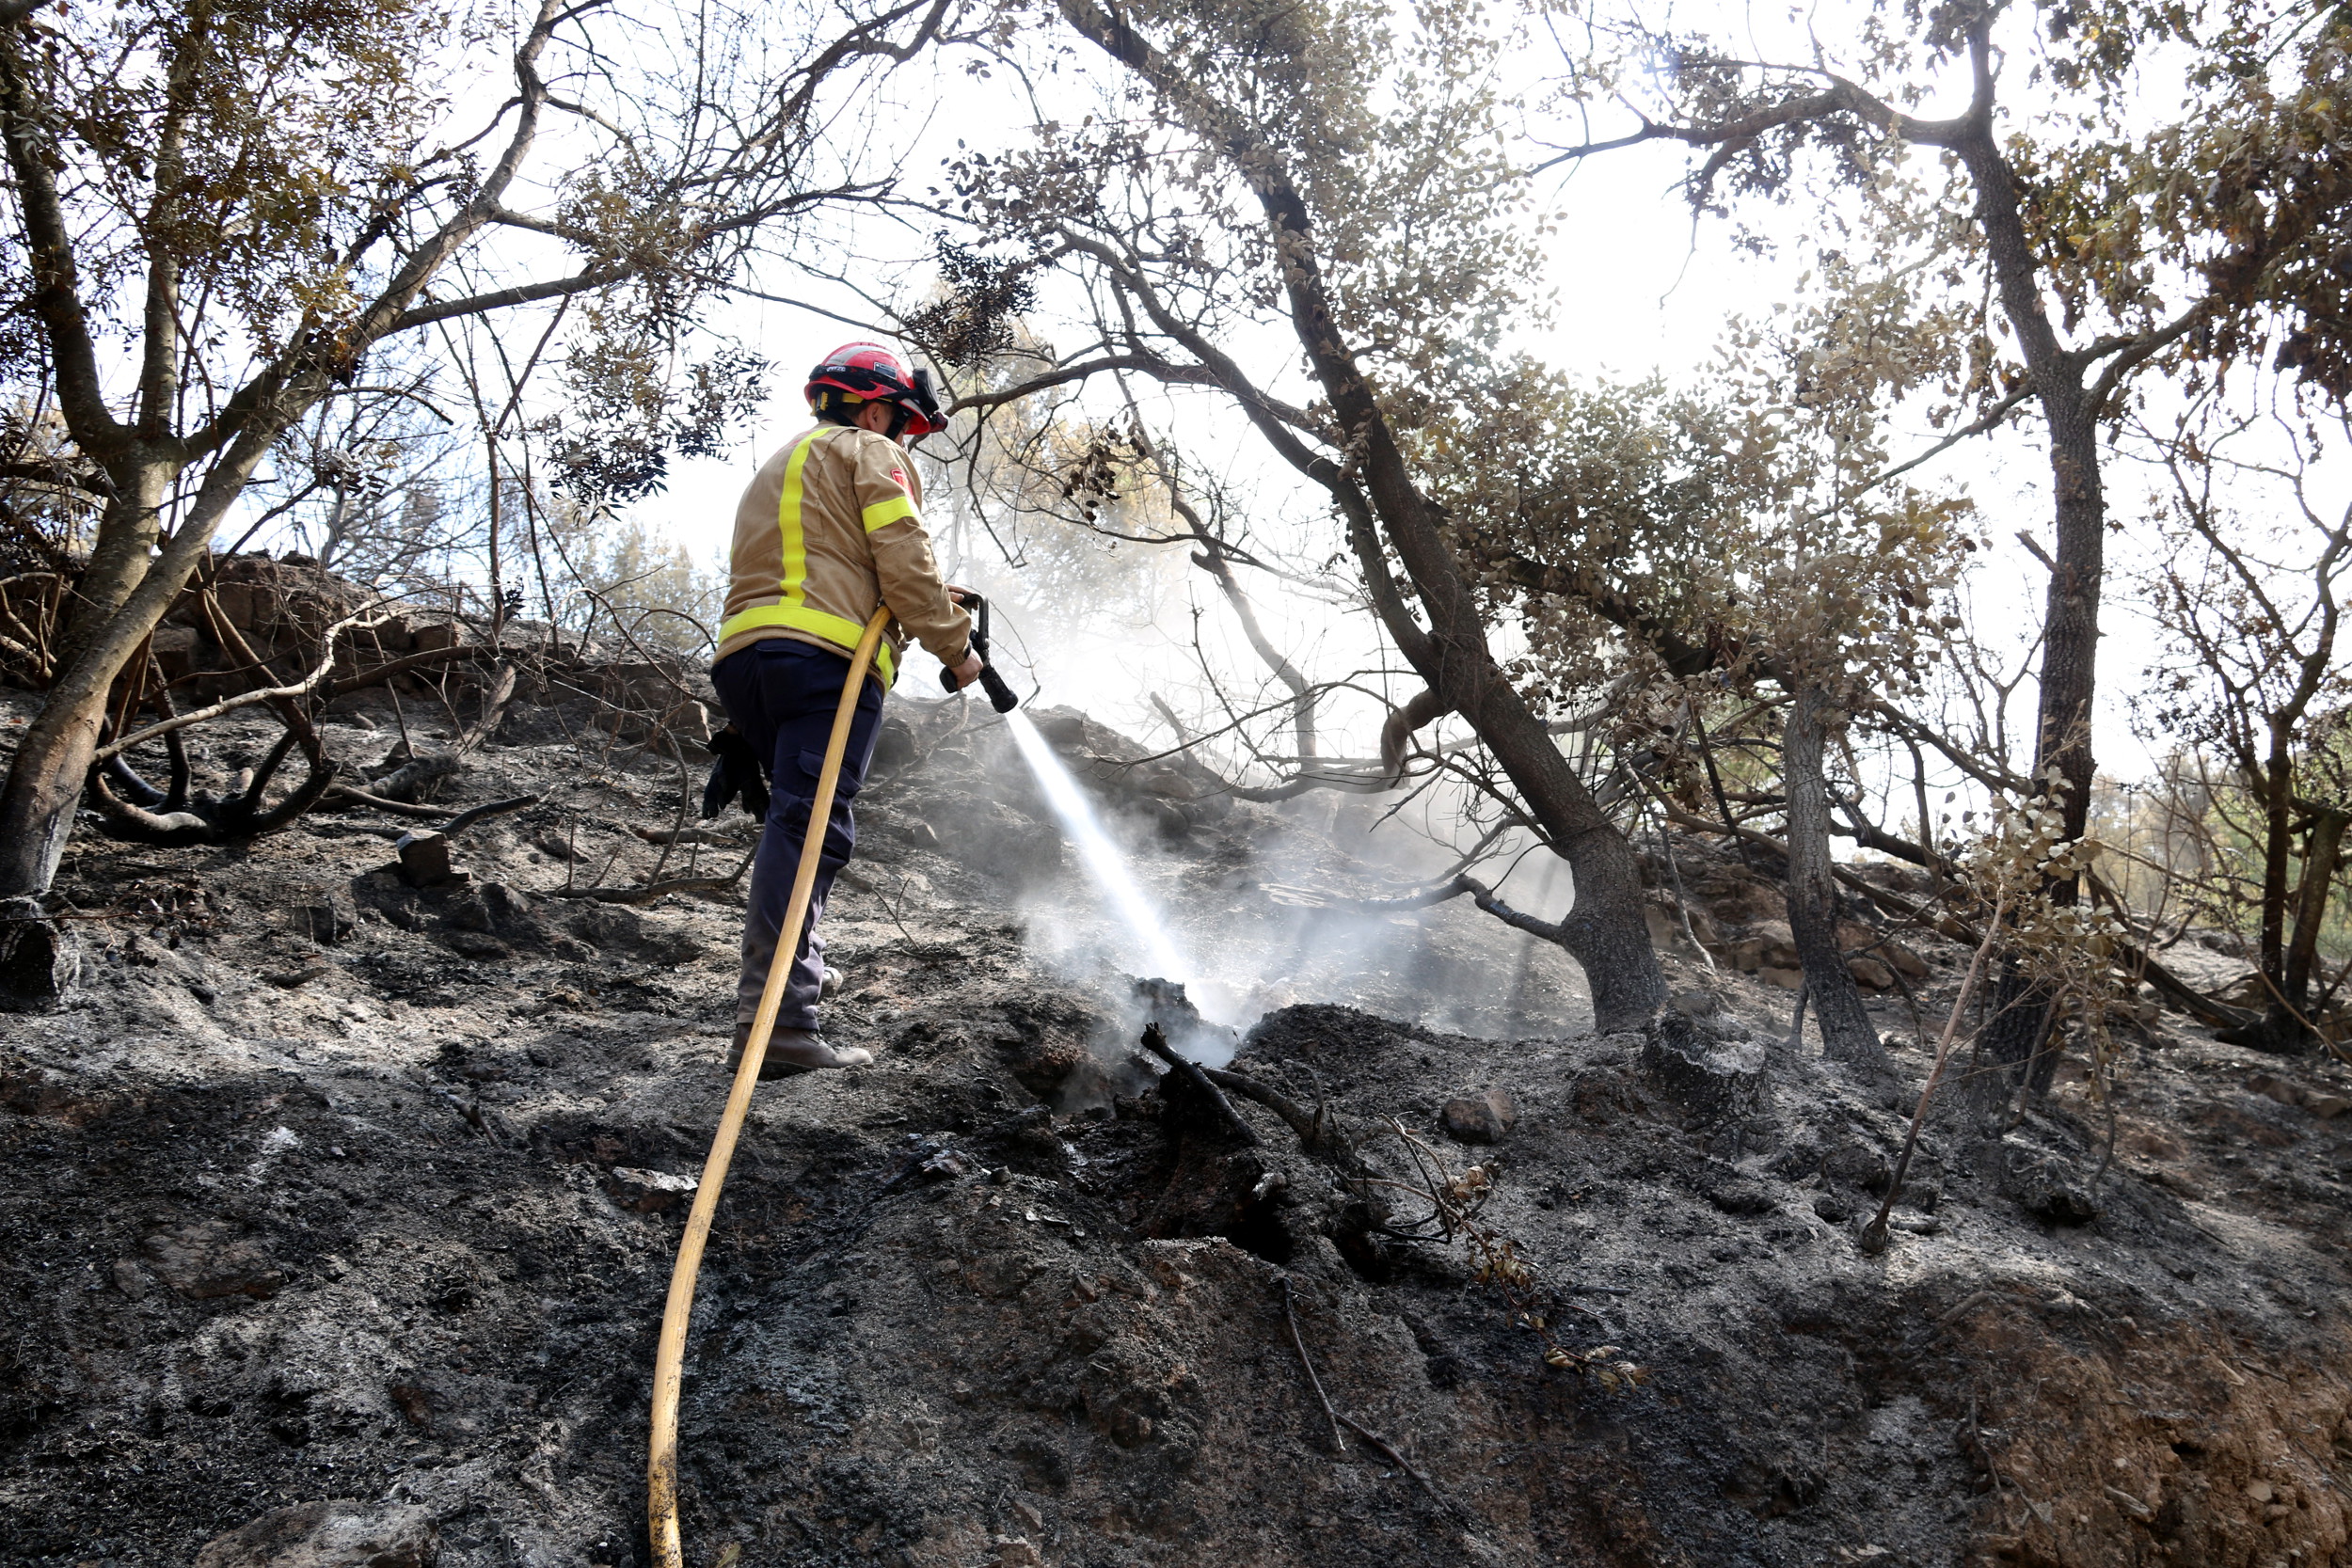 A firefighter putting out the fire near the Catalan village of Artés